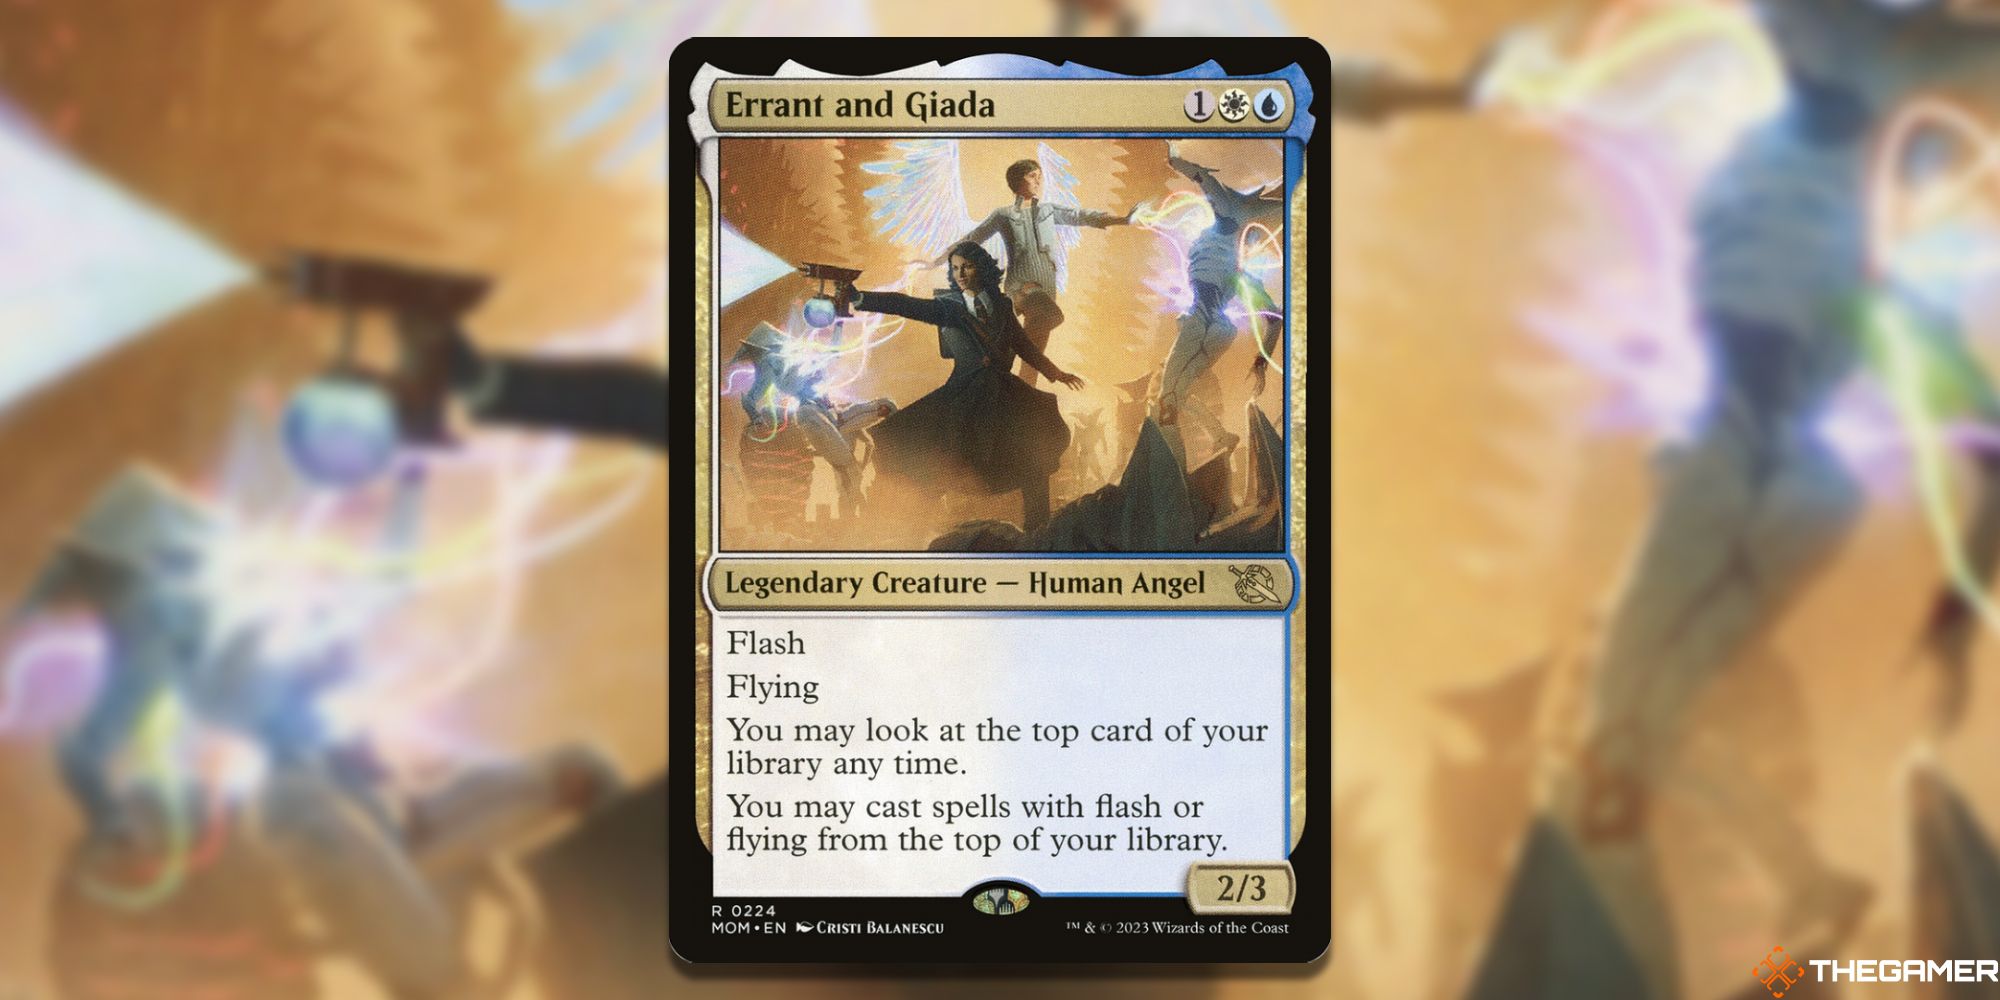 Image of the Tramp and Giada card in Magic: The Gathering, with artwork by Cristi Balanescu